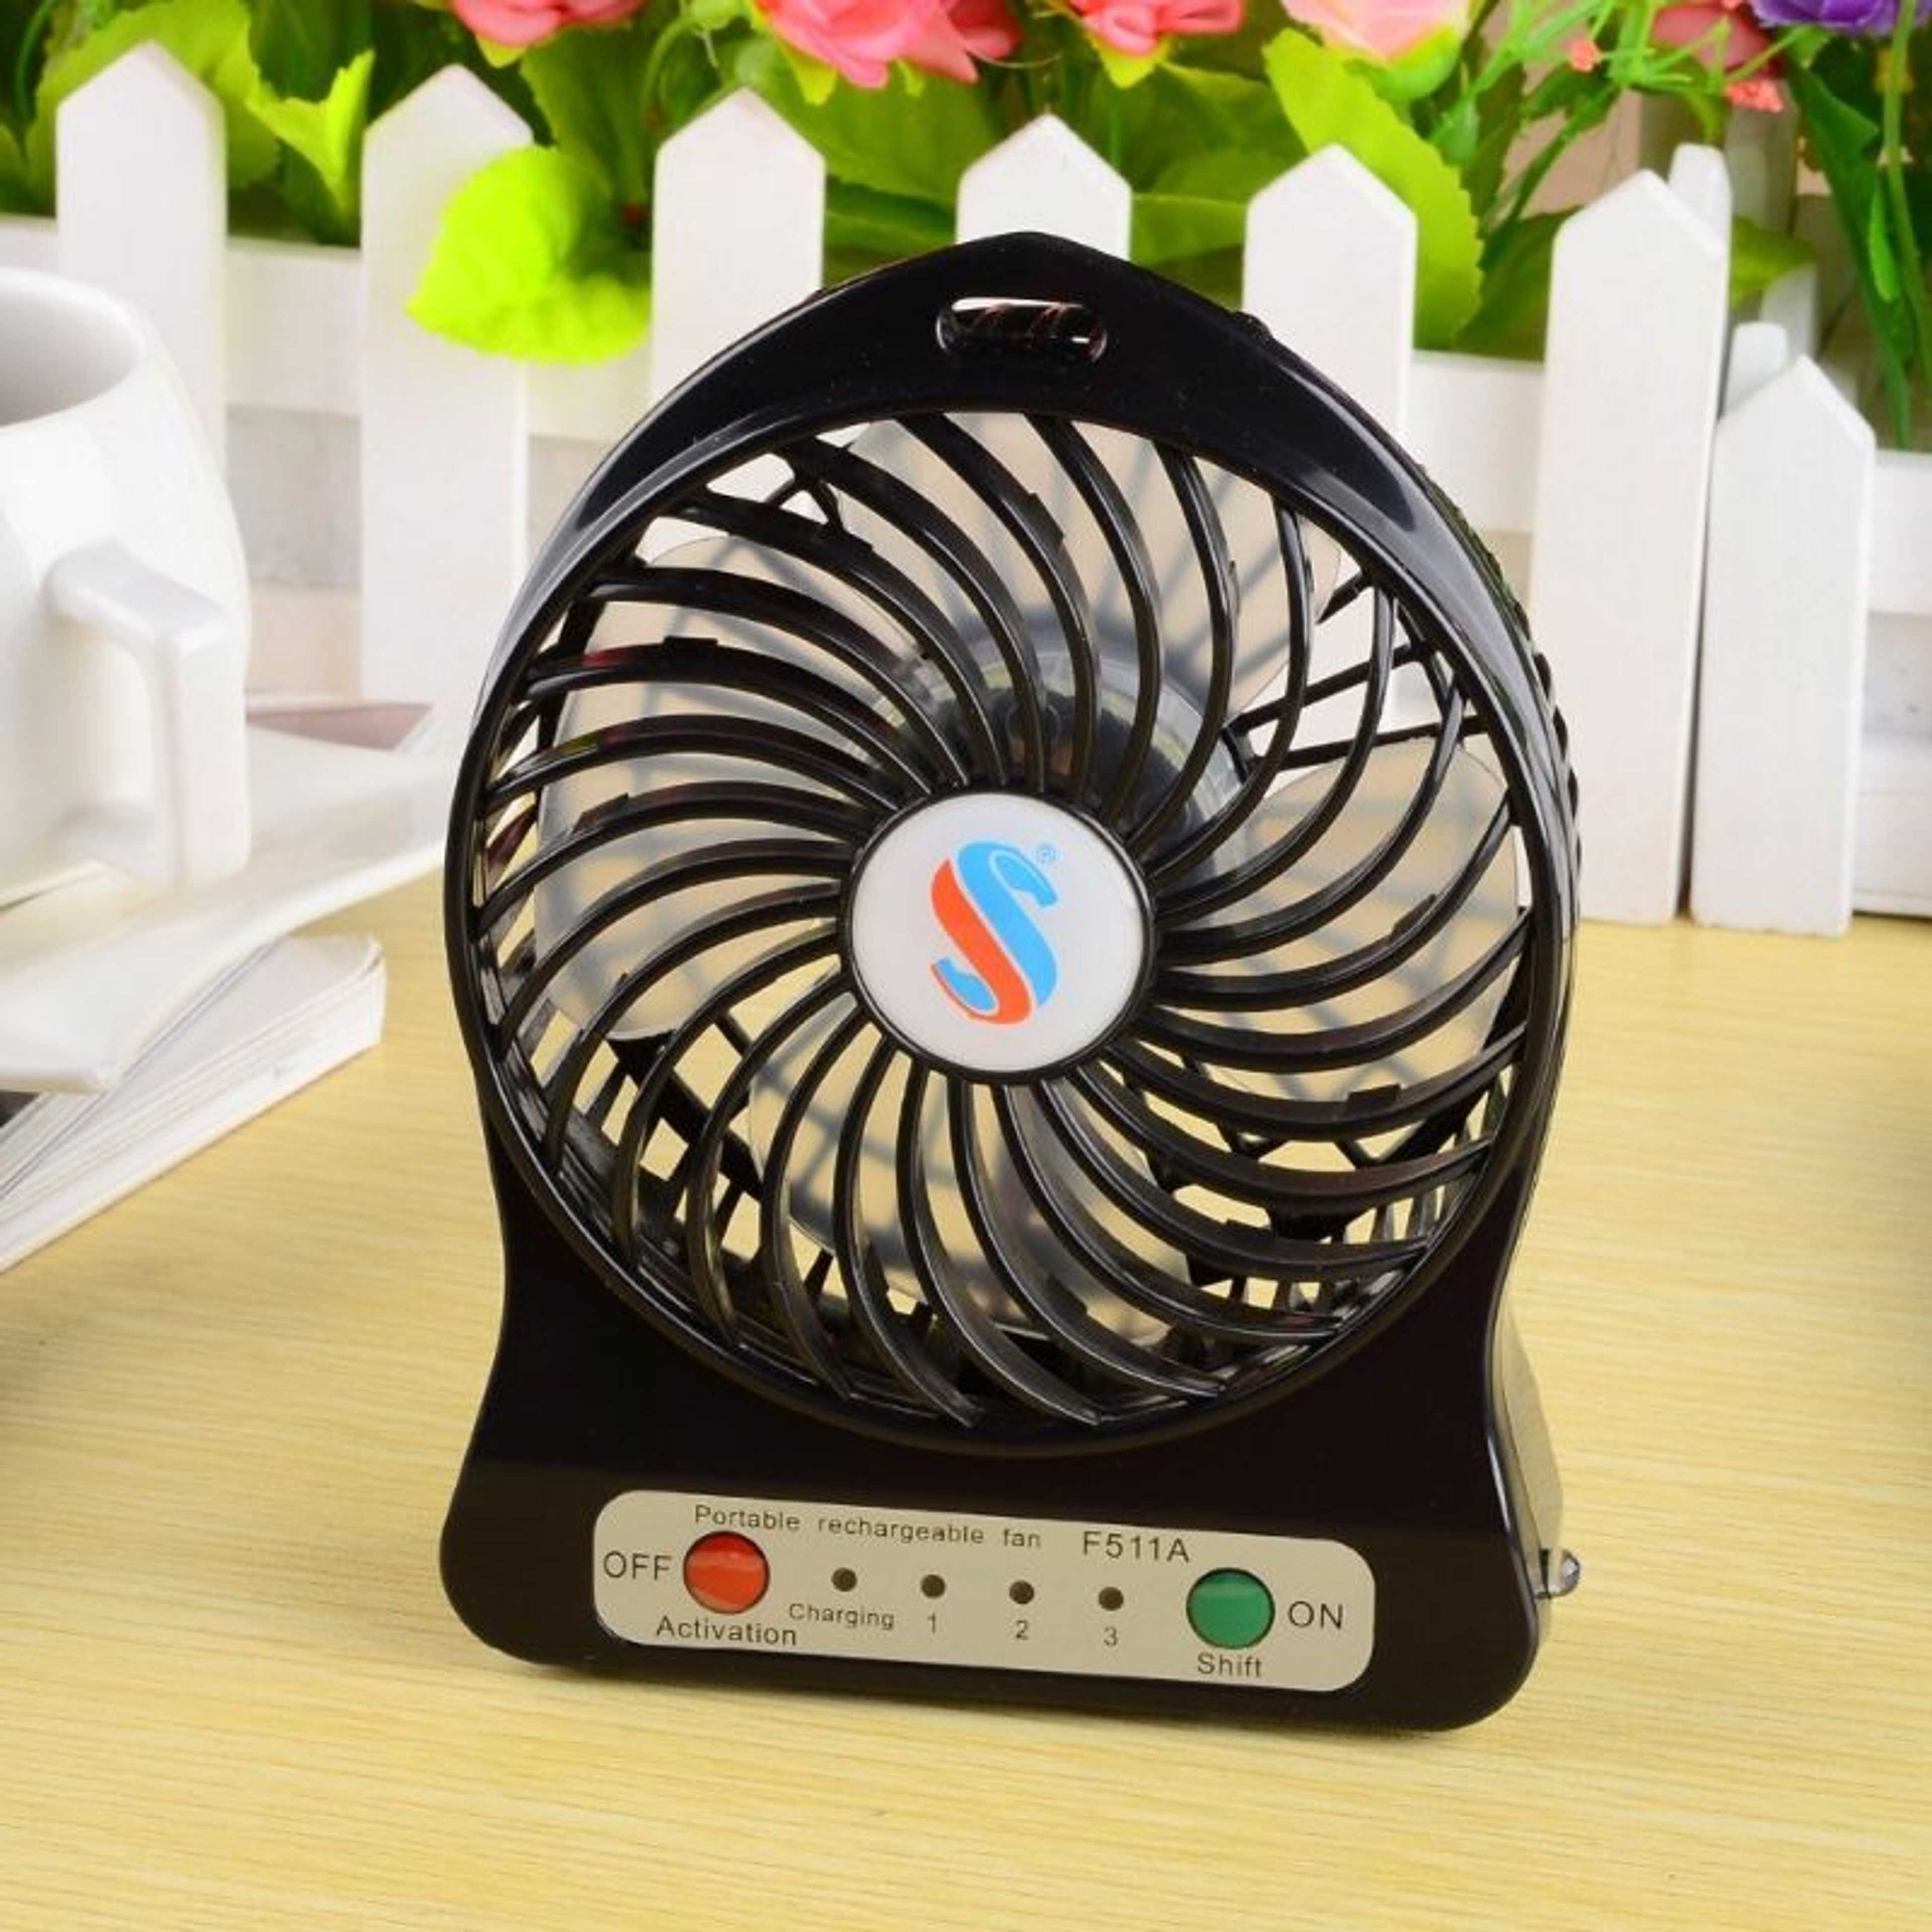 Handheld Mini Fan 2500mAh Huge Capacity Rechargeable Personal Small Fan Portable Cooling Desktop Fan Support Wireless & Micro USB Charging for Home Office Household Outdoor Traveling Pink